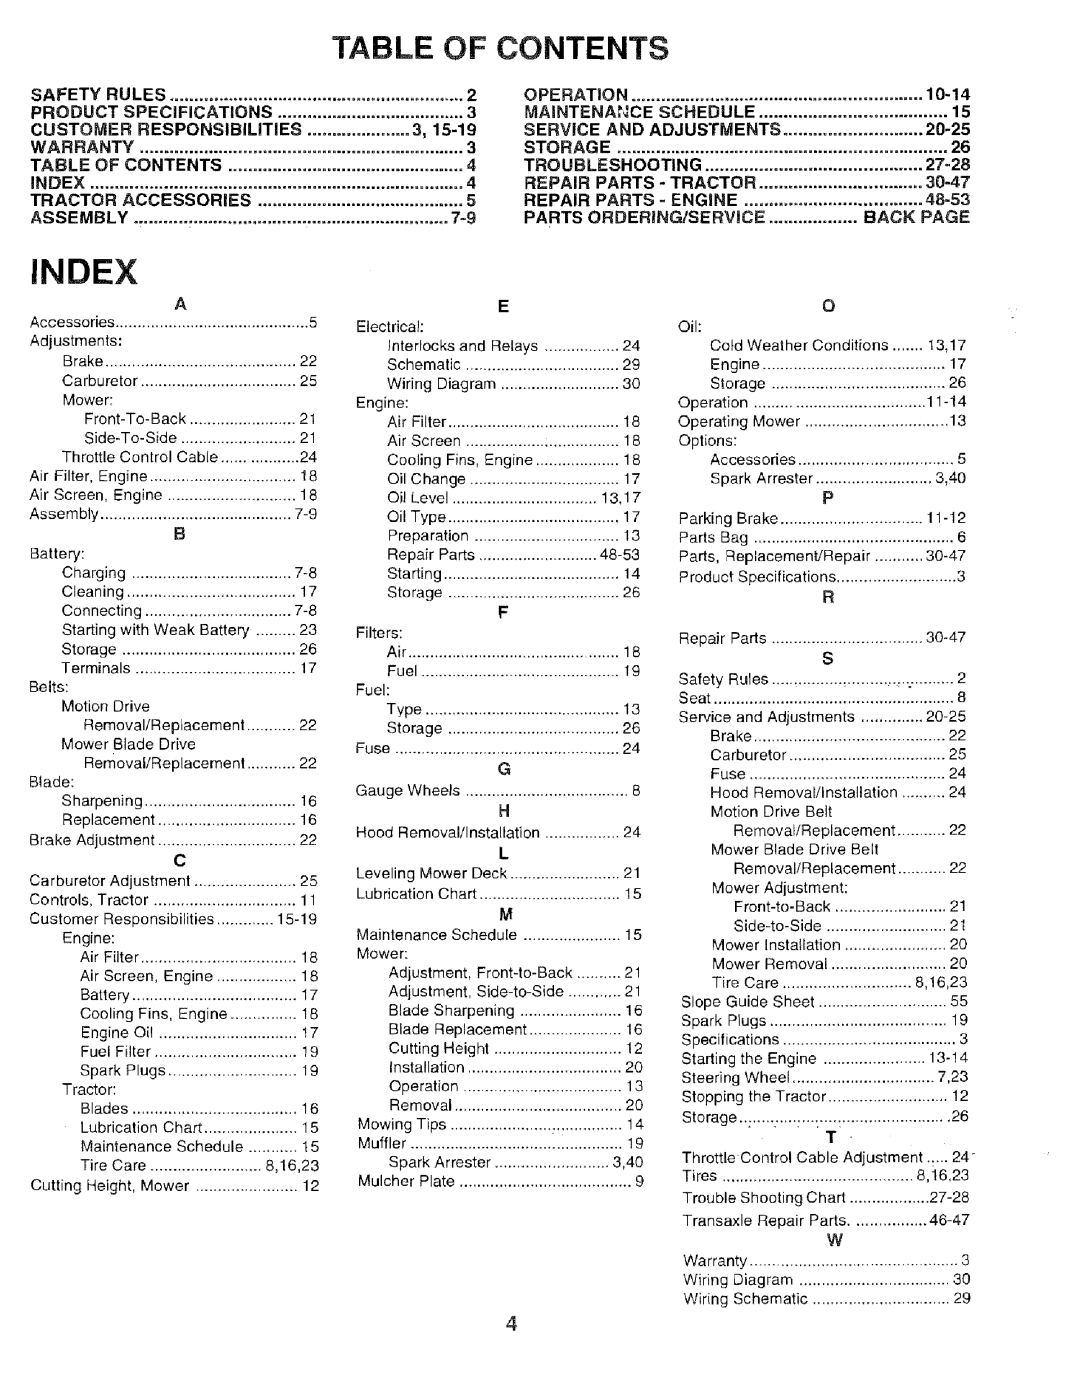 Sears 917.259567 Index, Table, Of Contents, 10-14, Product, Customer, Assembly, Parts Ordering/Serviice, Back Page 